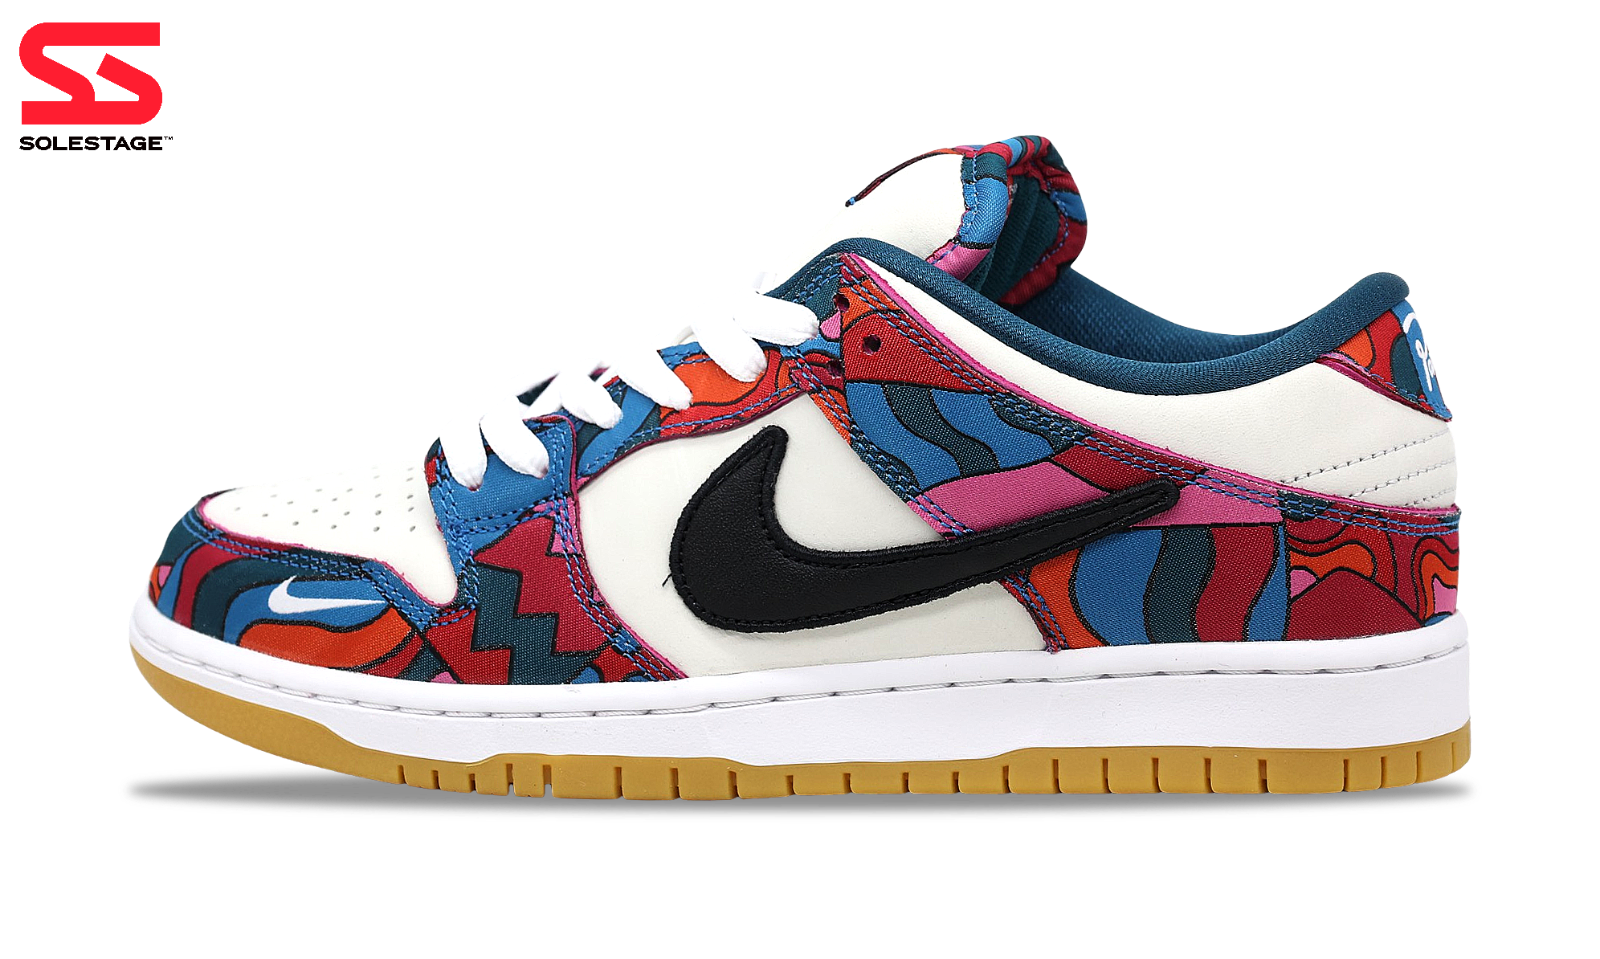 Size+8.5+-+Nike+Dunk+Low+Pro+SB+x+Parra+Abstract+Art+2021 for sale